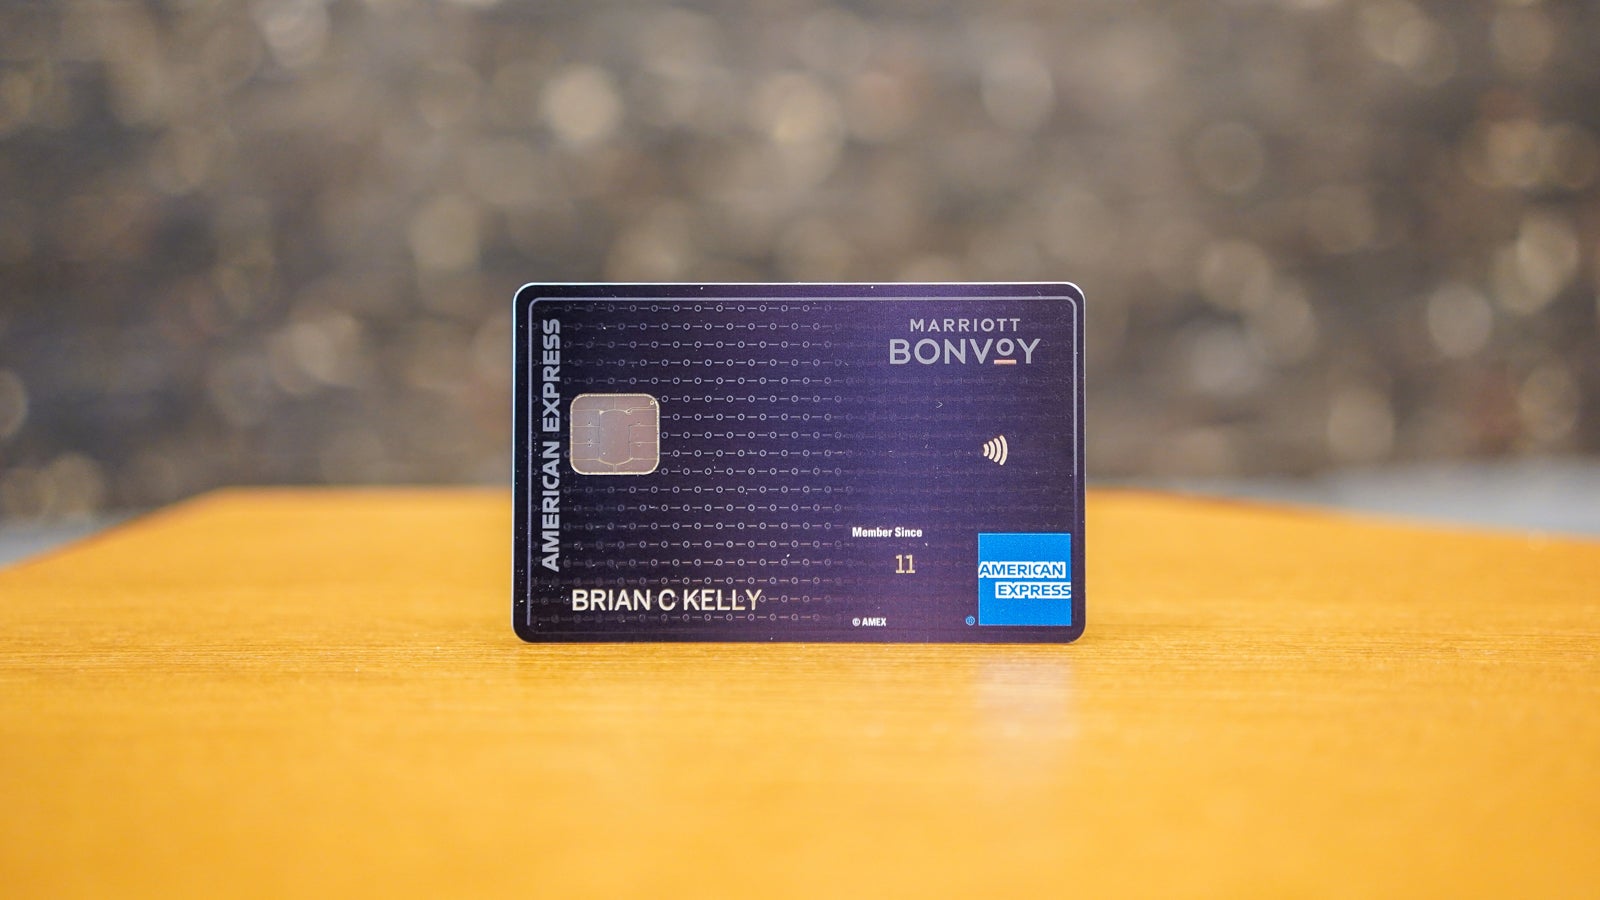 american express travel card military